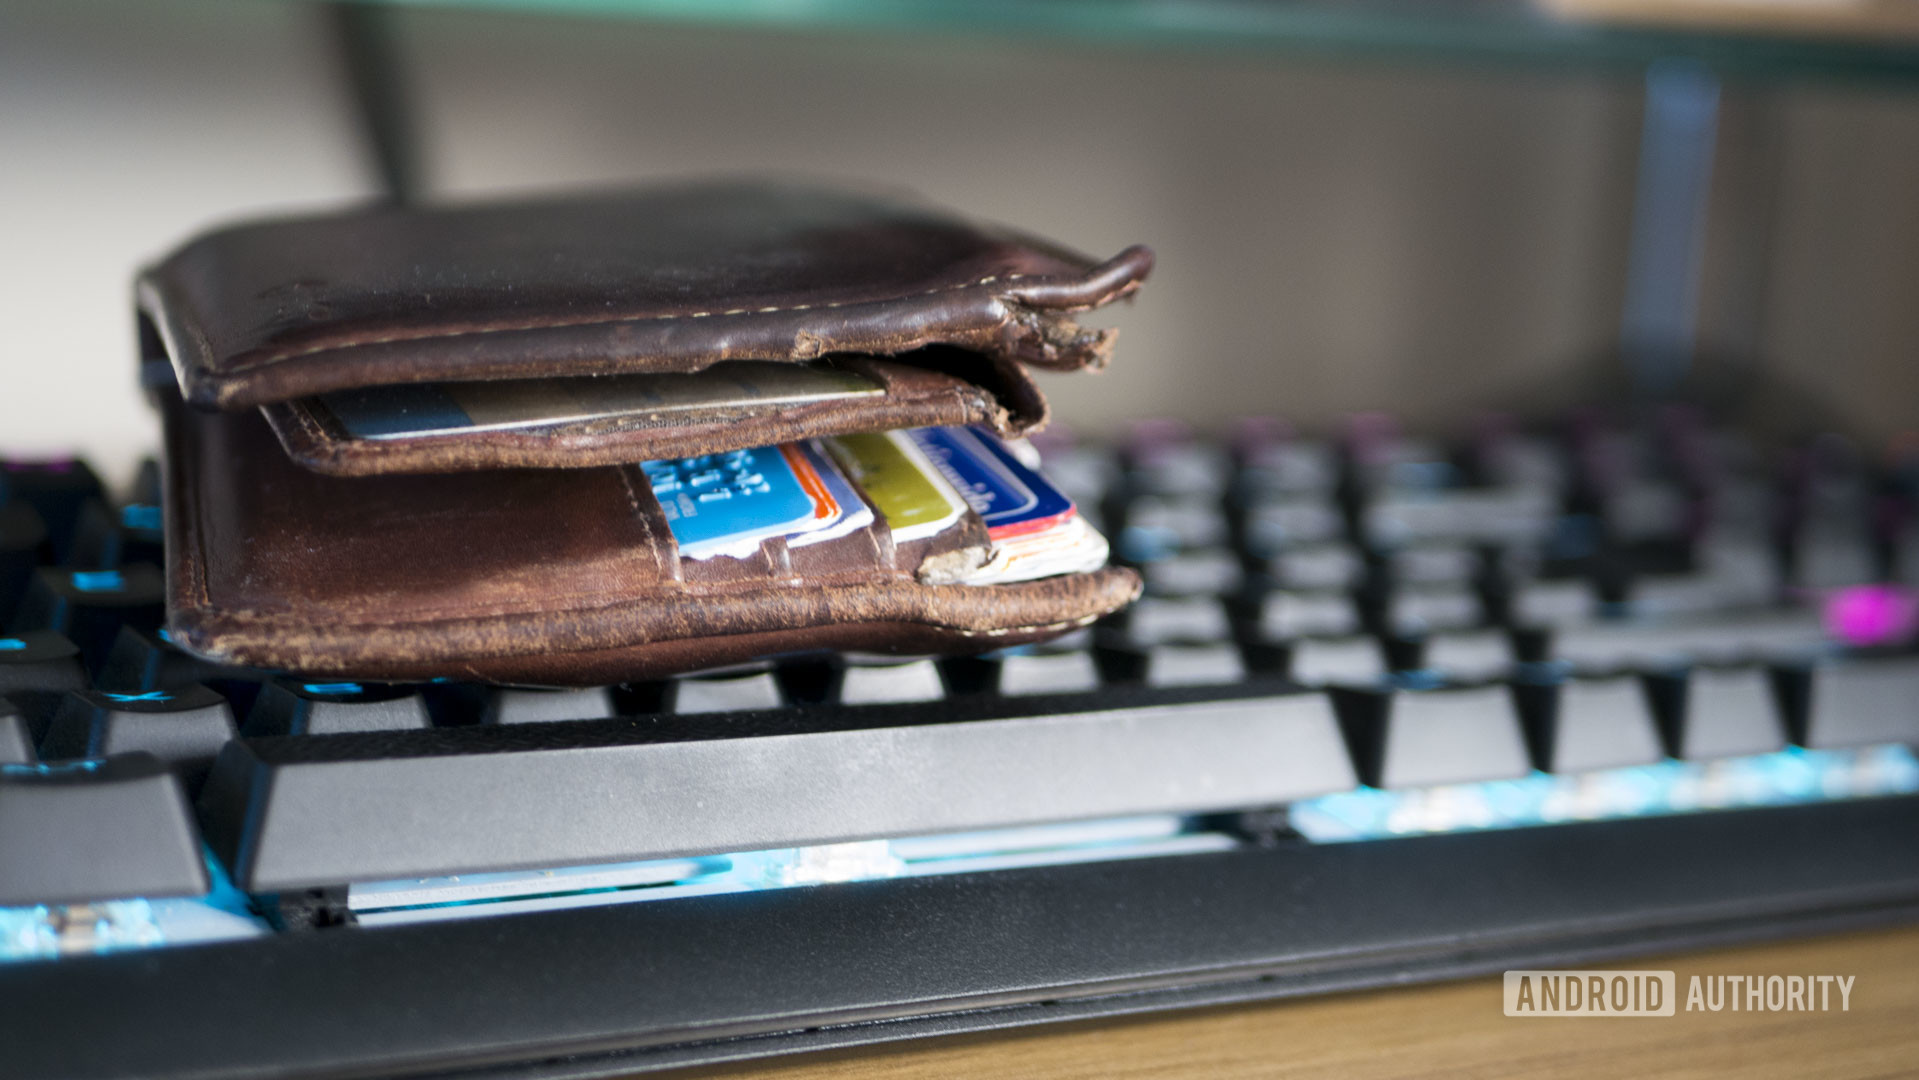  Wallet with credit cards on a keyboard - subscription services cost